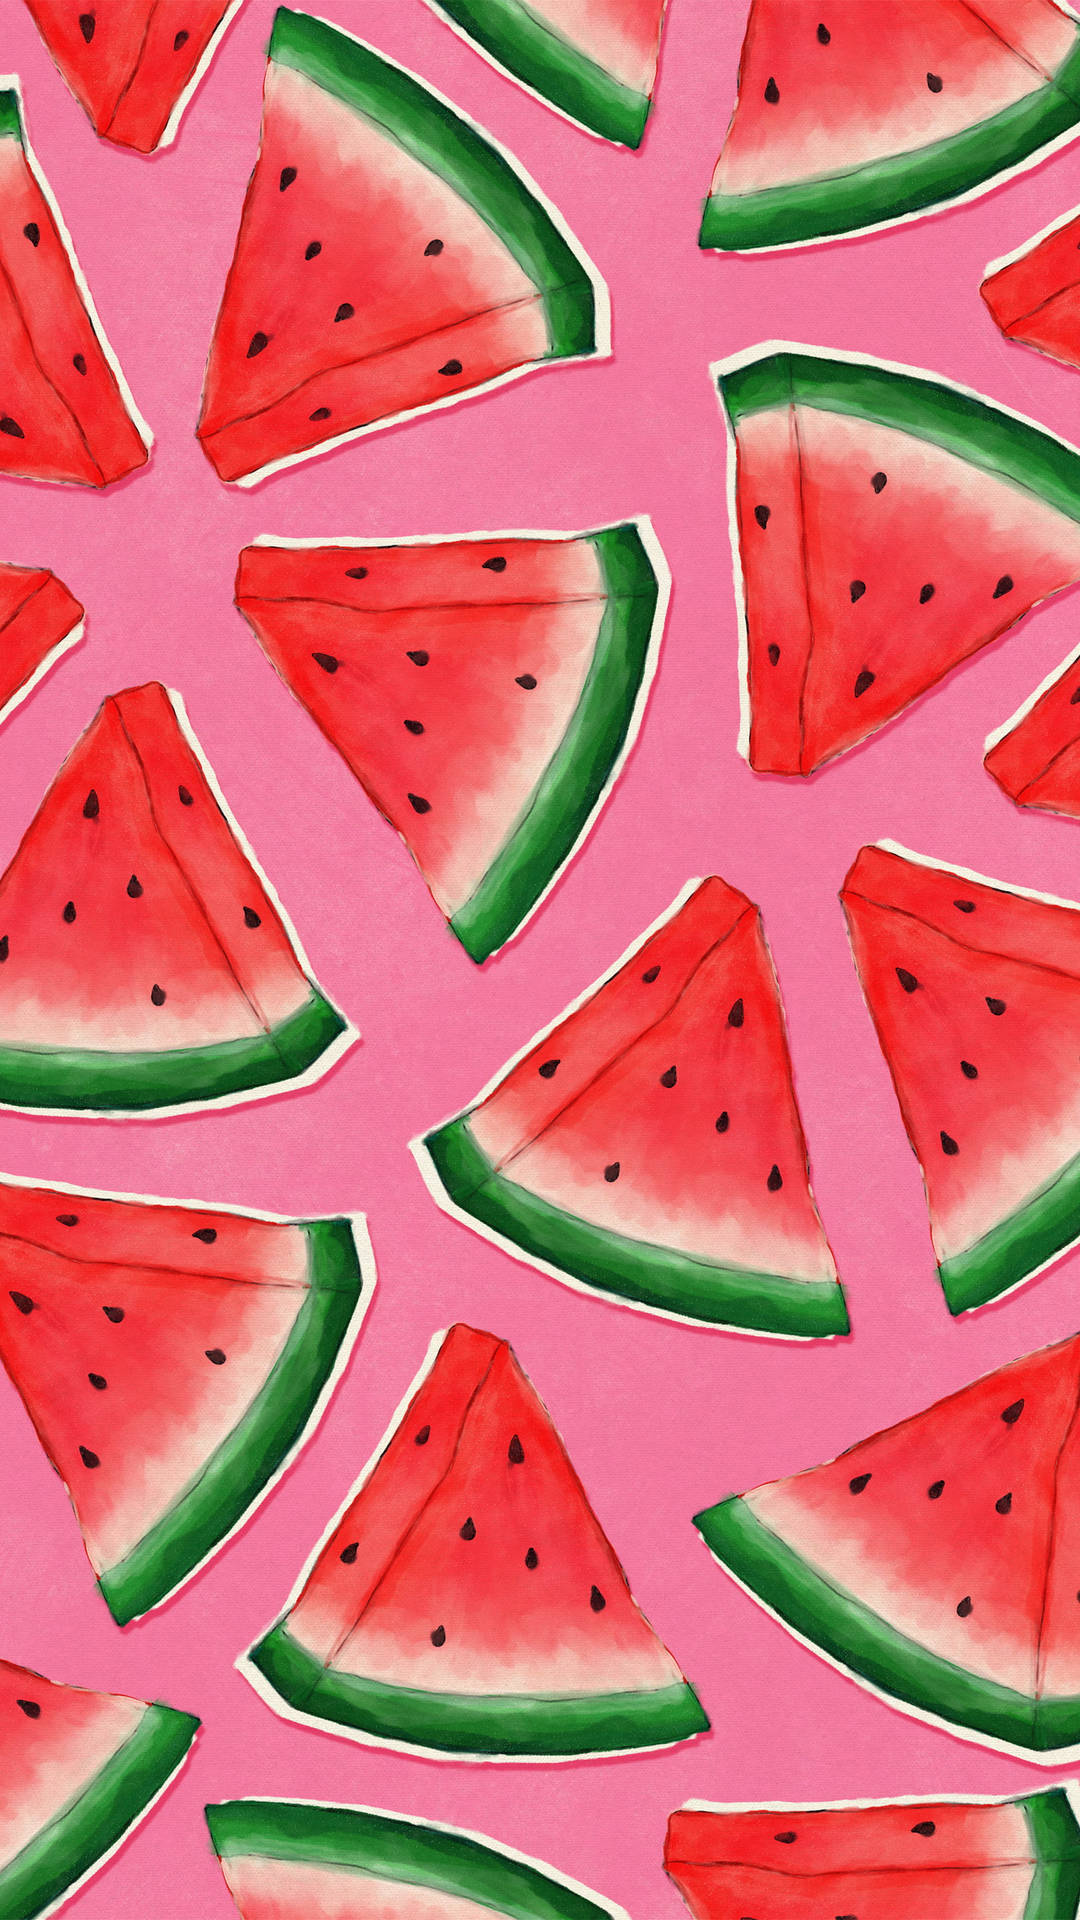 Cute Watermelon On Pink Surface